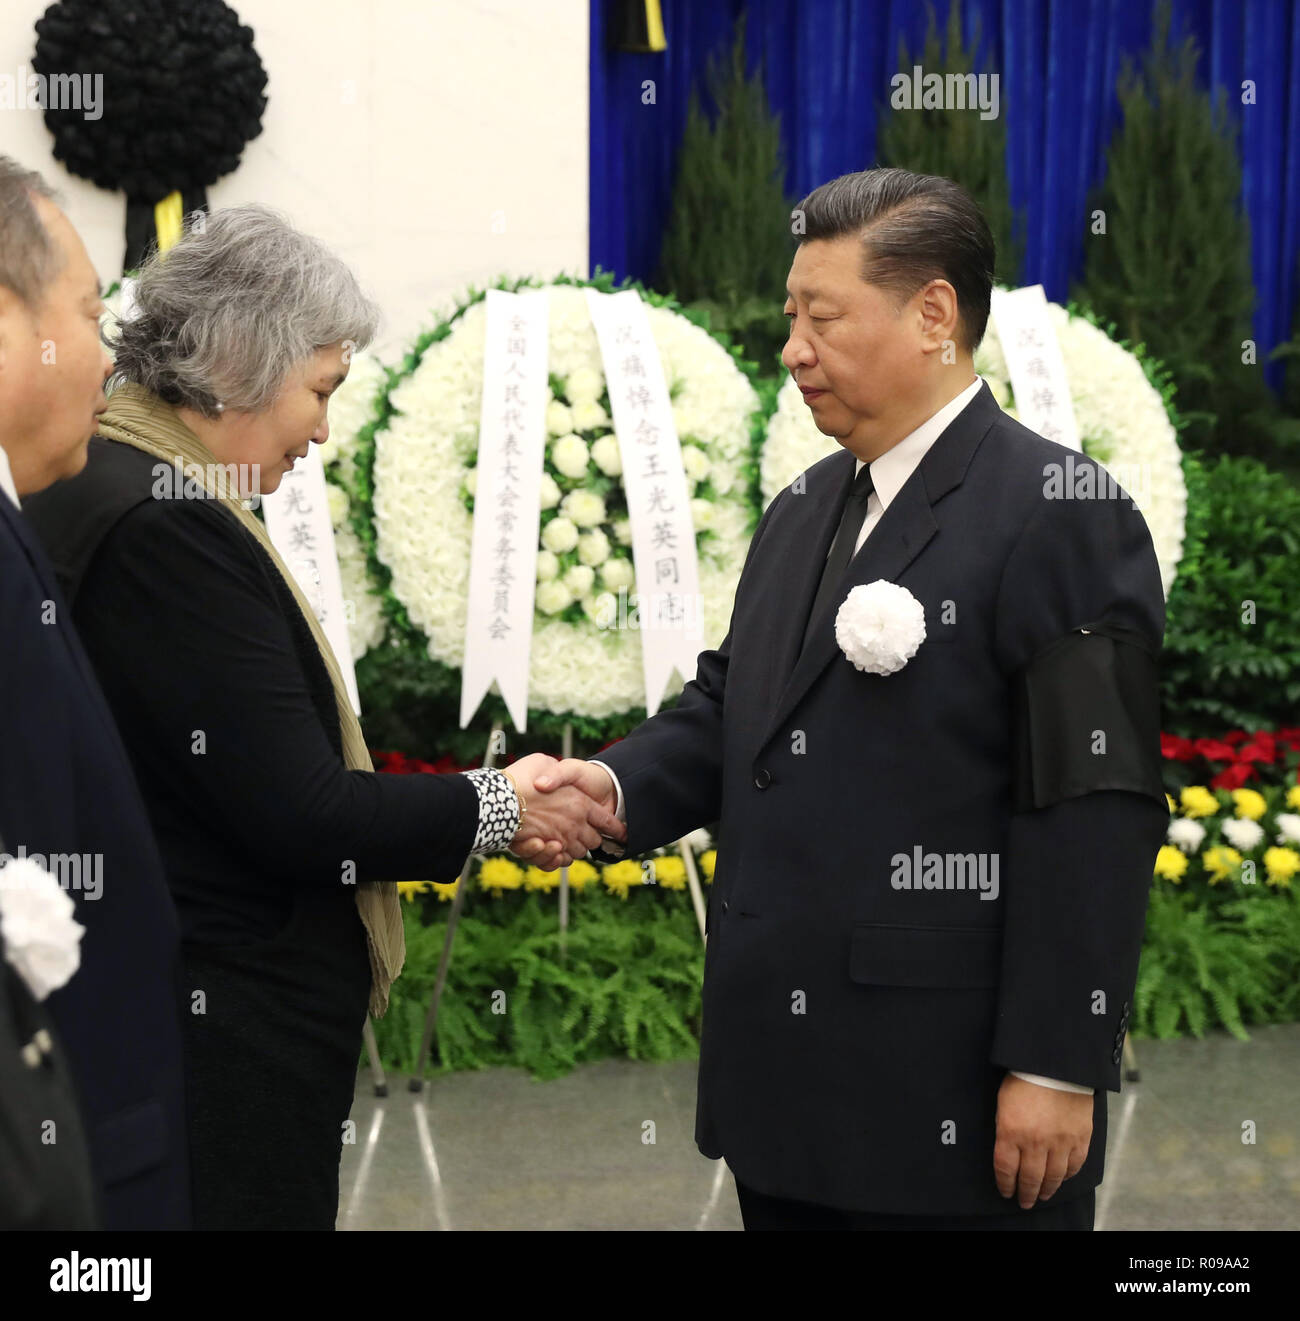 (181102) -- BEIJING, Nov. 2, 2018 (Xinhua) -- Chinese President Xi Jinping (R) shakes hands with a family member of Wang Guangying, a former leader of the China National Democratic Construction Association (CNDCA) and All-China Federation of Industry and Commerce (ACFIC), at the funeral of Wang at the Babaoshan Revolutionary Cemetery in Beijing, capital of China, Nov. 2, 2018. Wang, also former vice chairman of the National People's Congress Standing Committee and former vice chairman of the National Committee of the Chinese People's Political Consultative Conference, passed away due to il Stock Photo